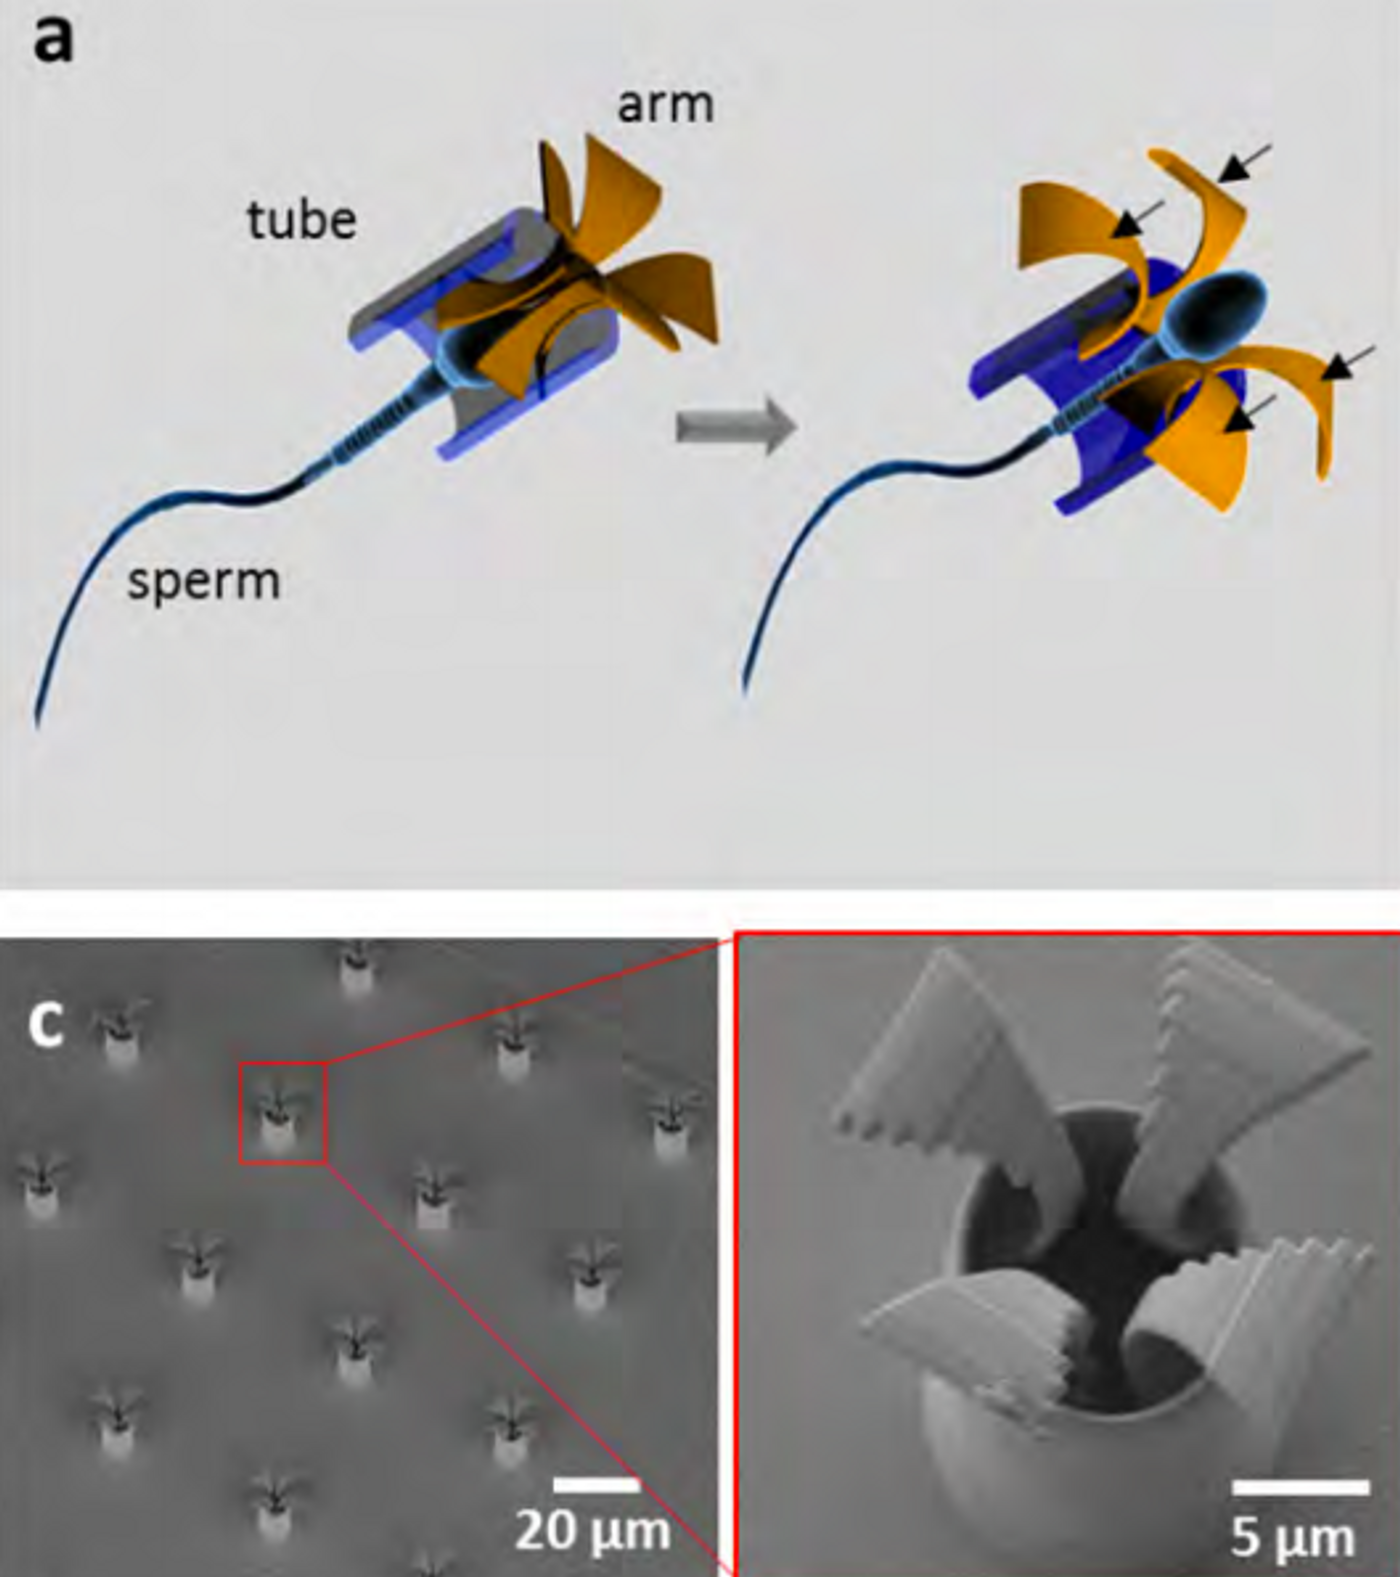  (a) Schematic of the sperm-hybrid micromotor and sperm release process. Black arrows = the reactive force on the arms upon hitting an obstacle. (c) SEM images of an array of printed tetrapod microstructures. / Credit: Medical Physics 